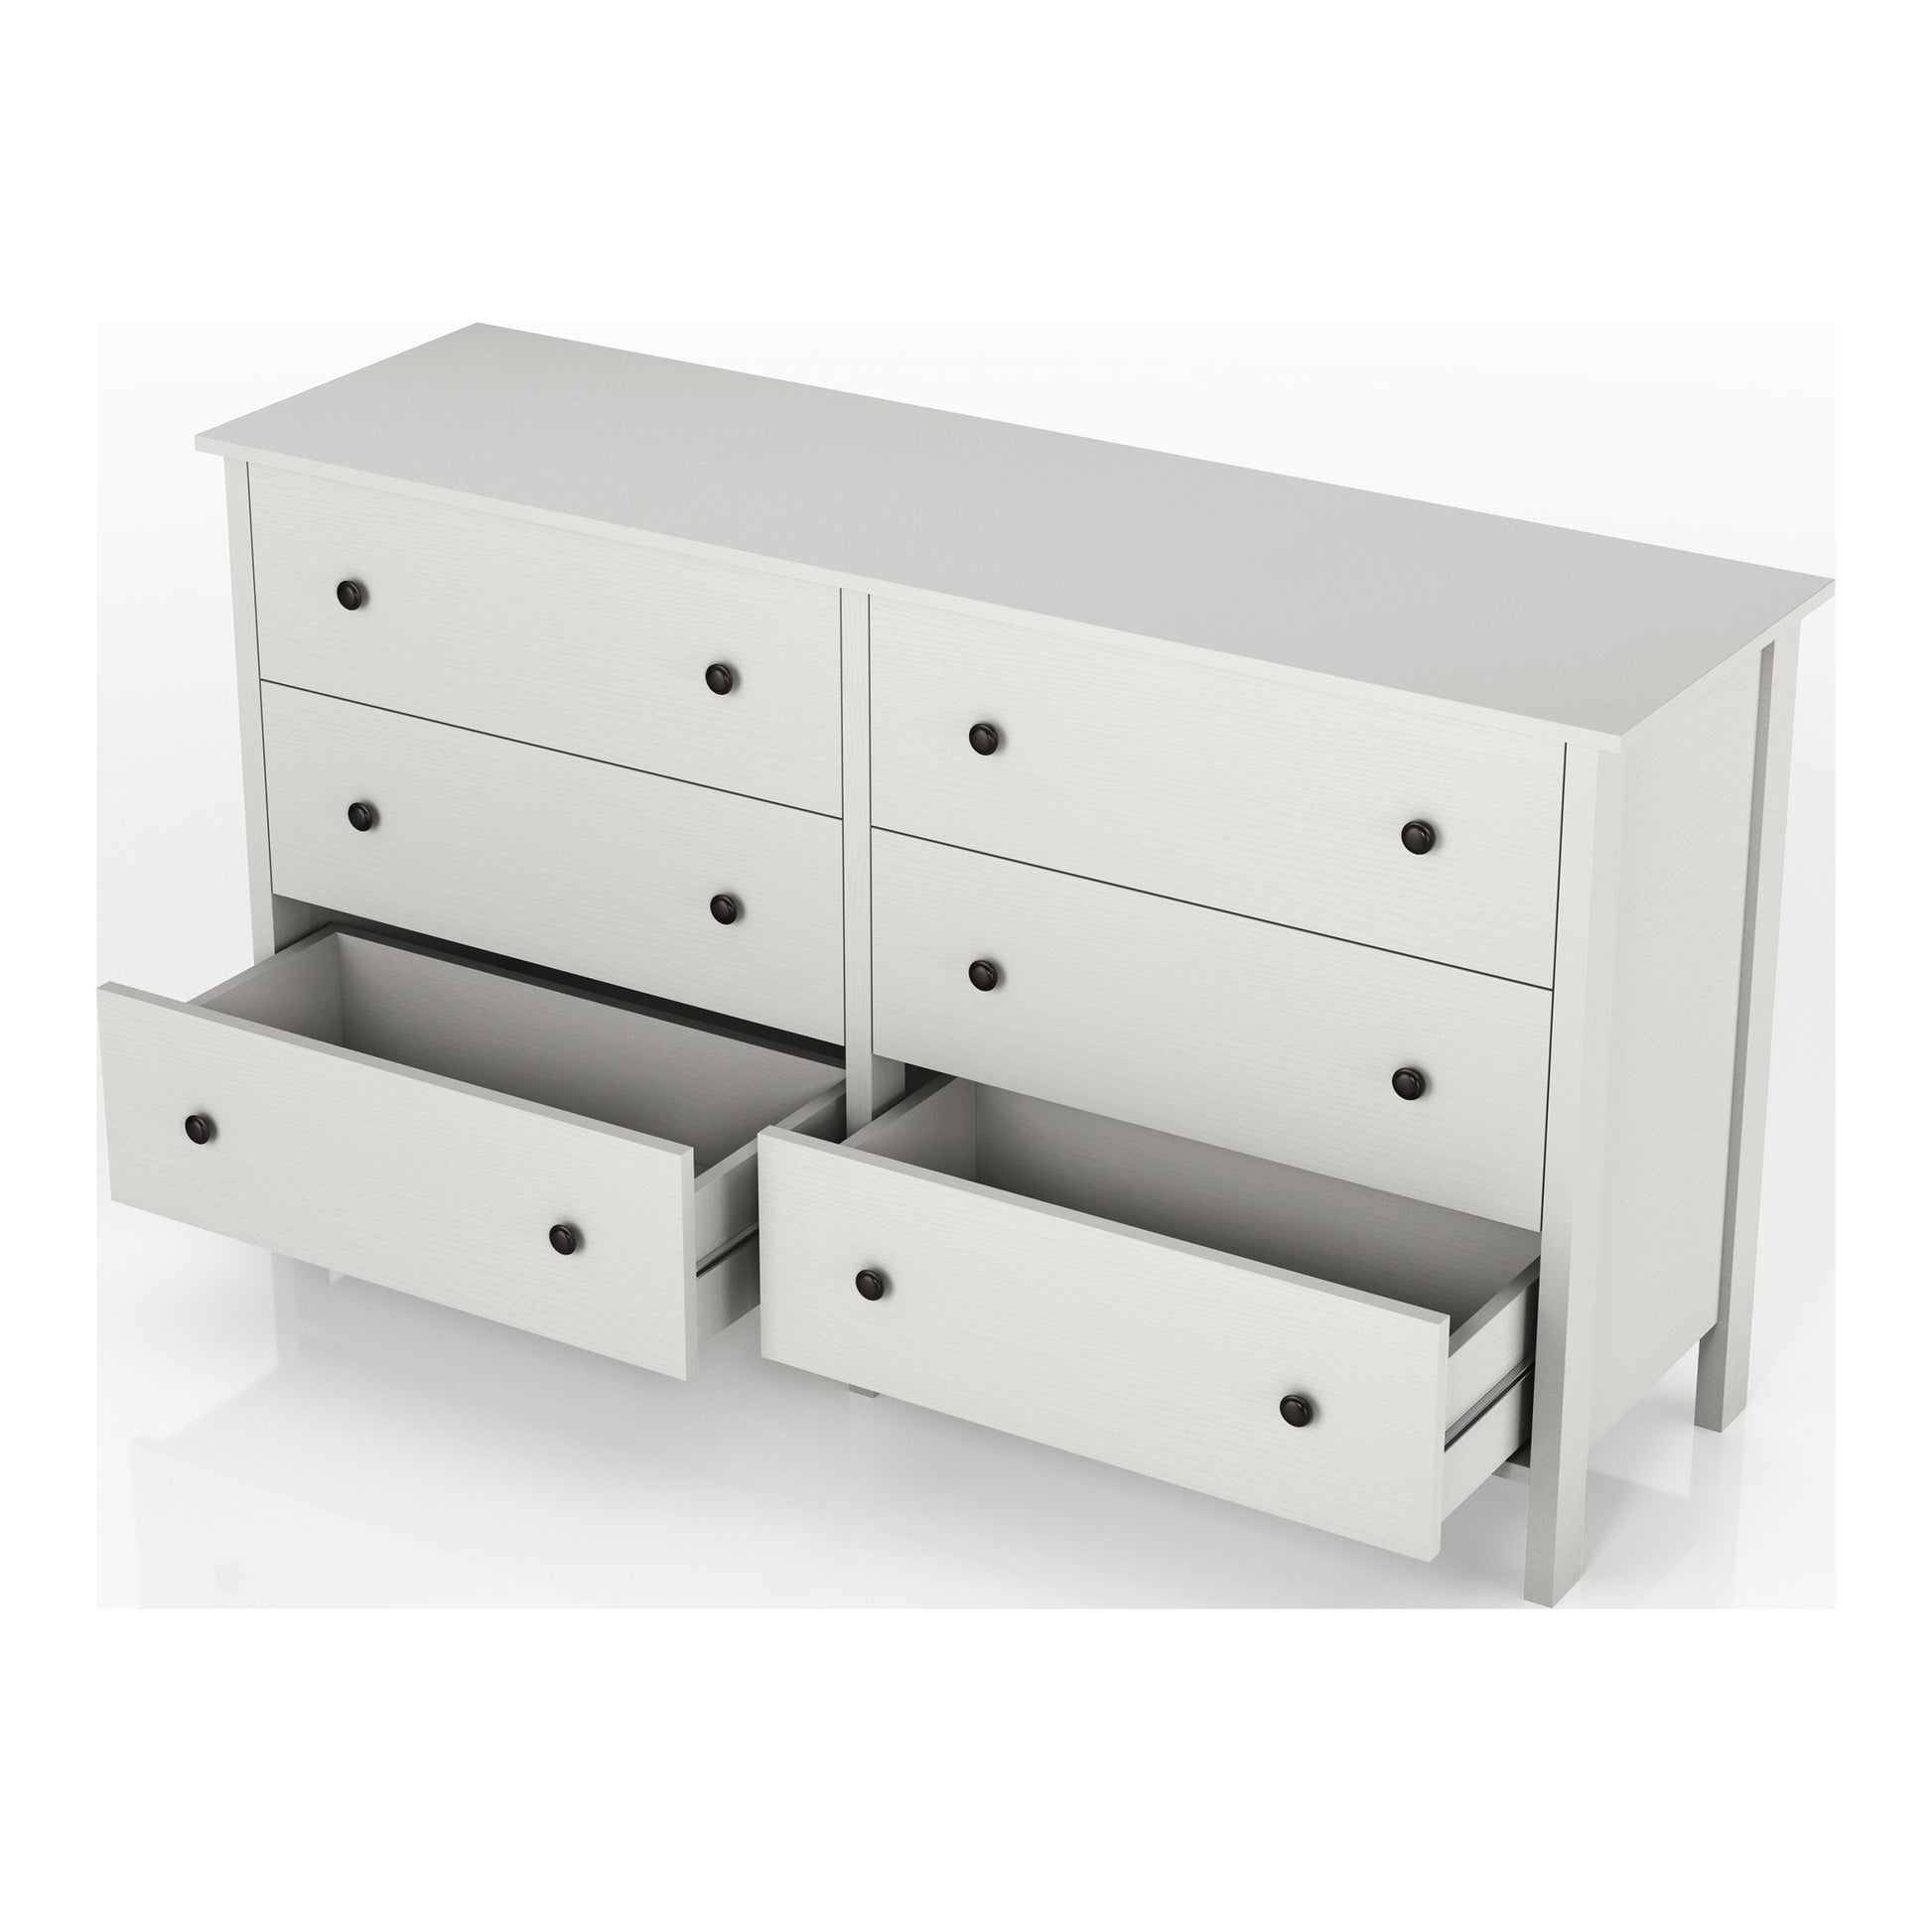 Left angled transitional white six-drawer youth dresser with two bottom drawers open on a white background